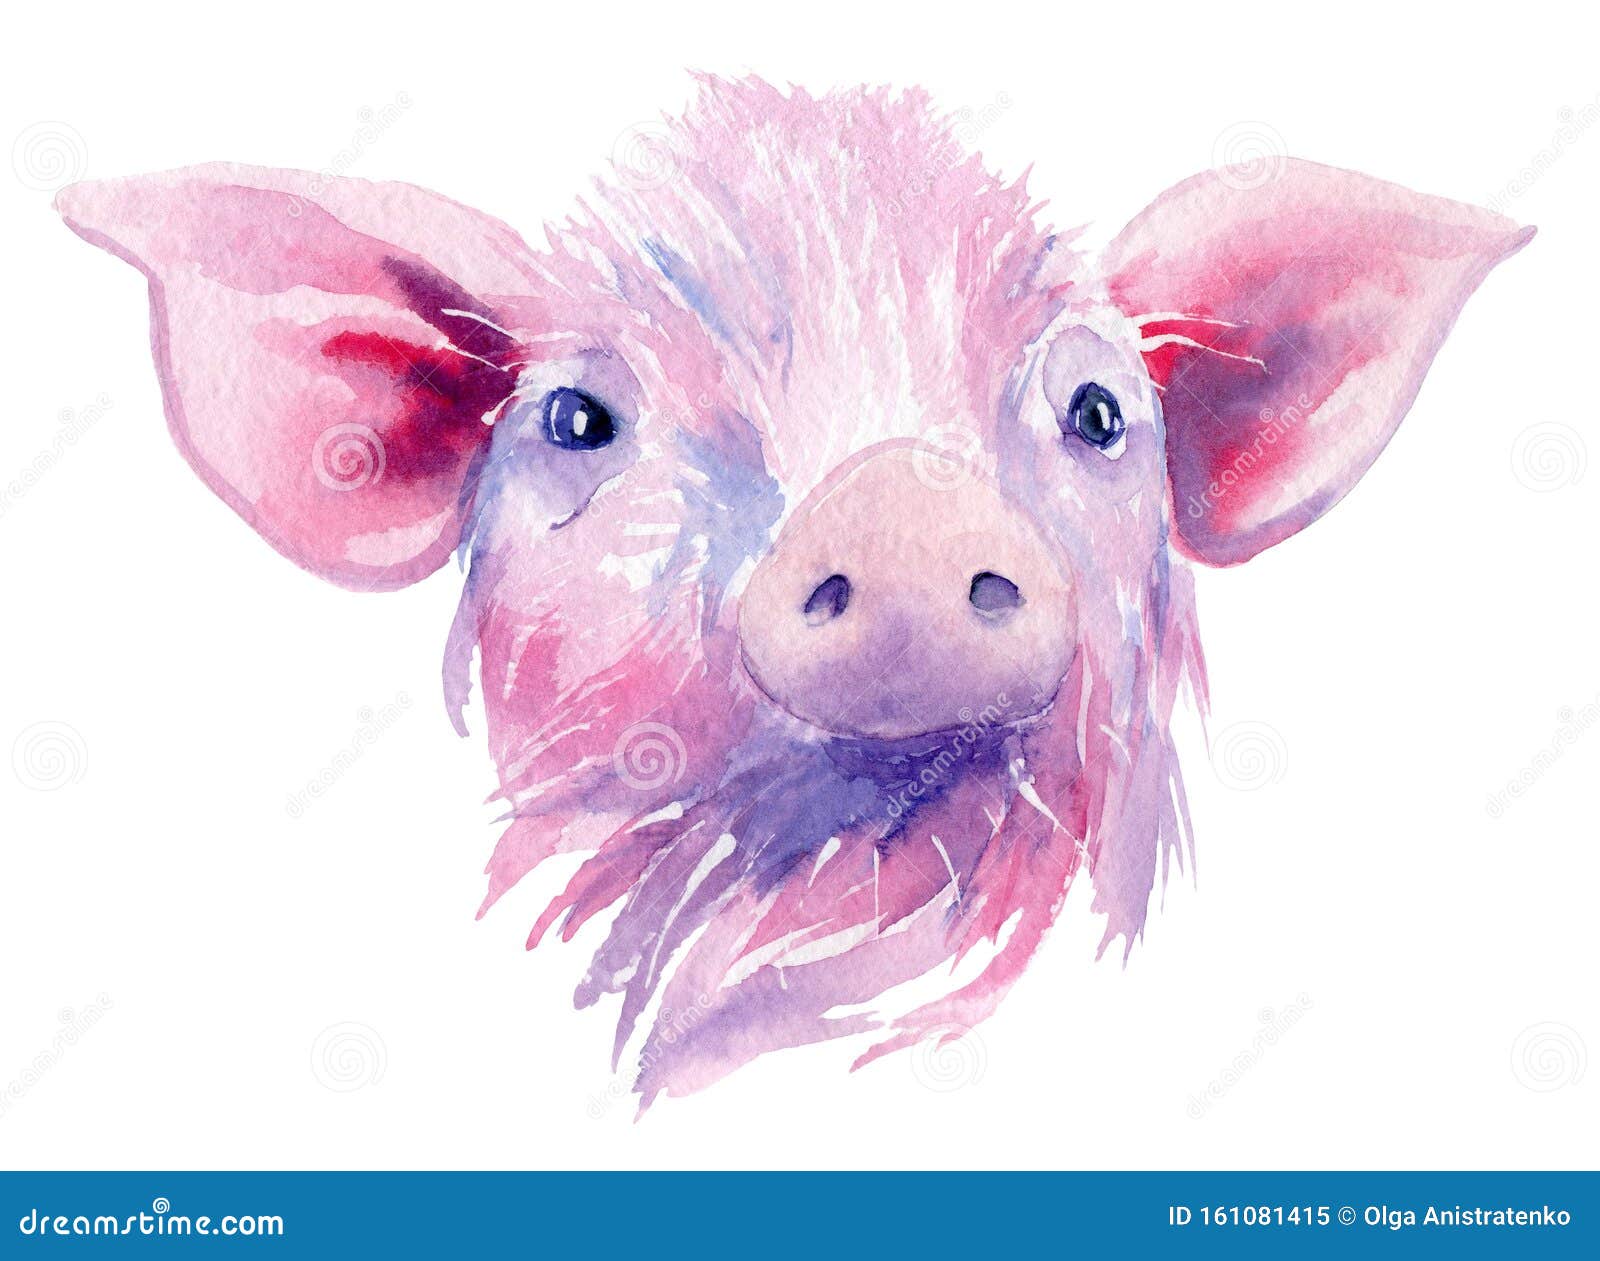 1 063 Drawing Pig Photos Free Royalty Free Stock Photos From Dreamstime